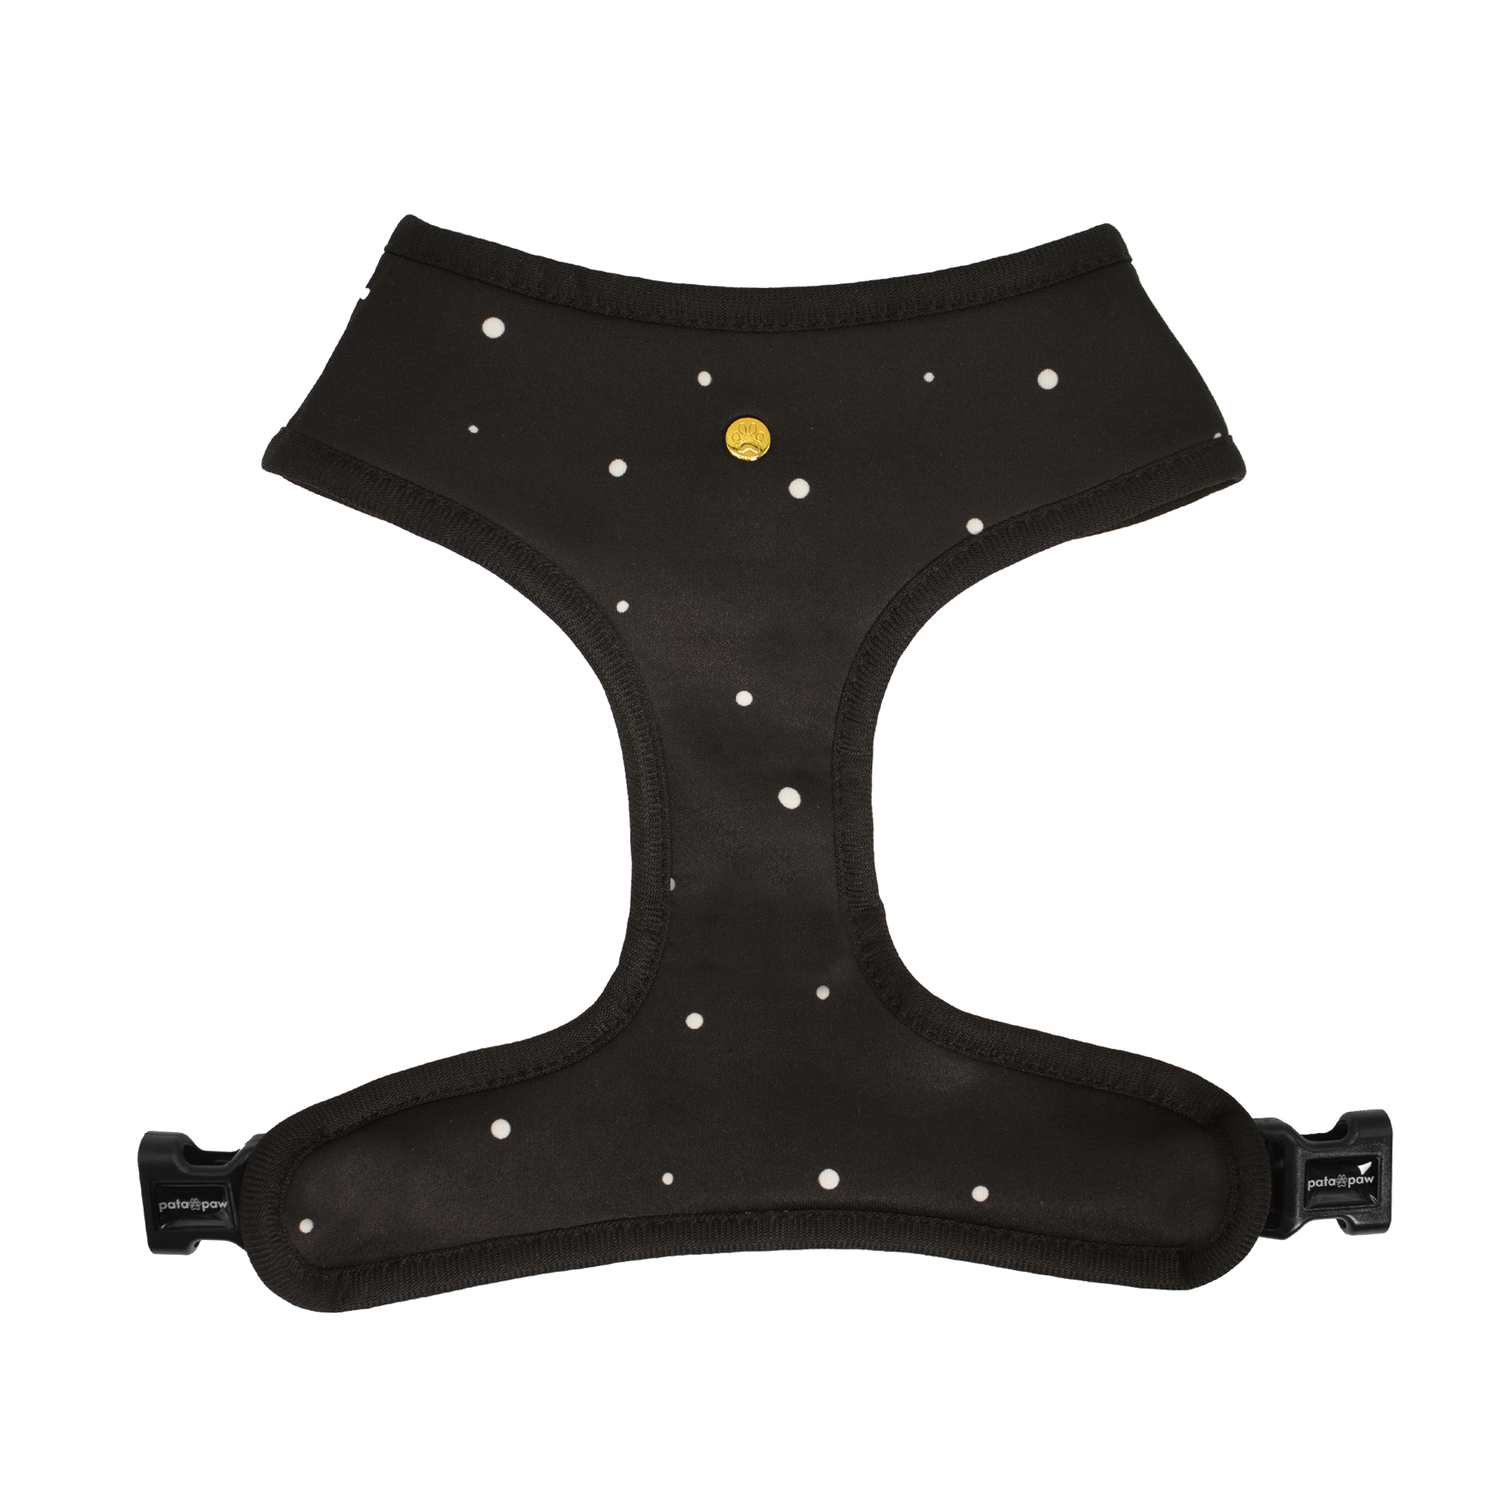 Pata Paw moo reversible harness showing a timeless and chic design of hand-painted dots on a black background.